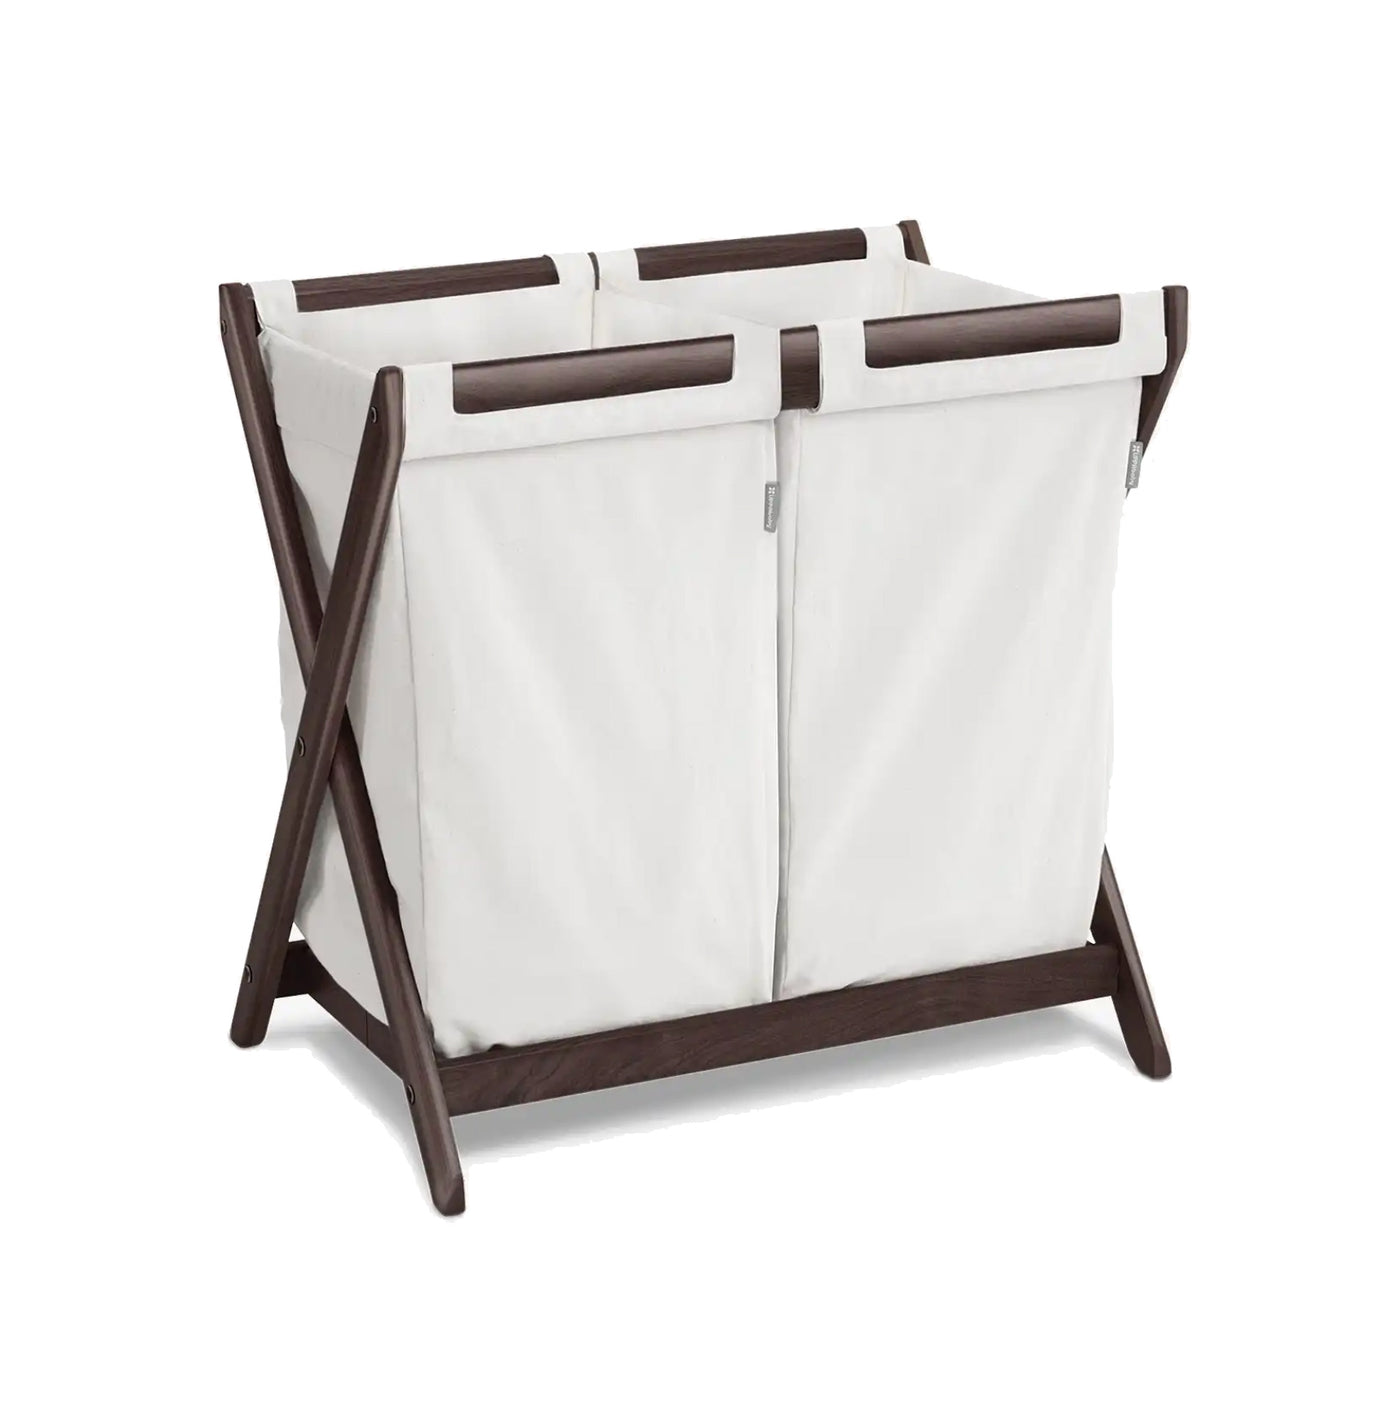 UPPAbaby Bassinet Stand Hamper Insert as a laundry hamper 